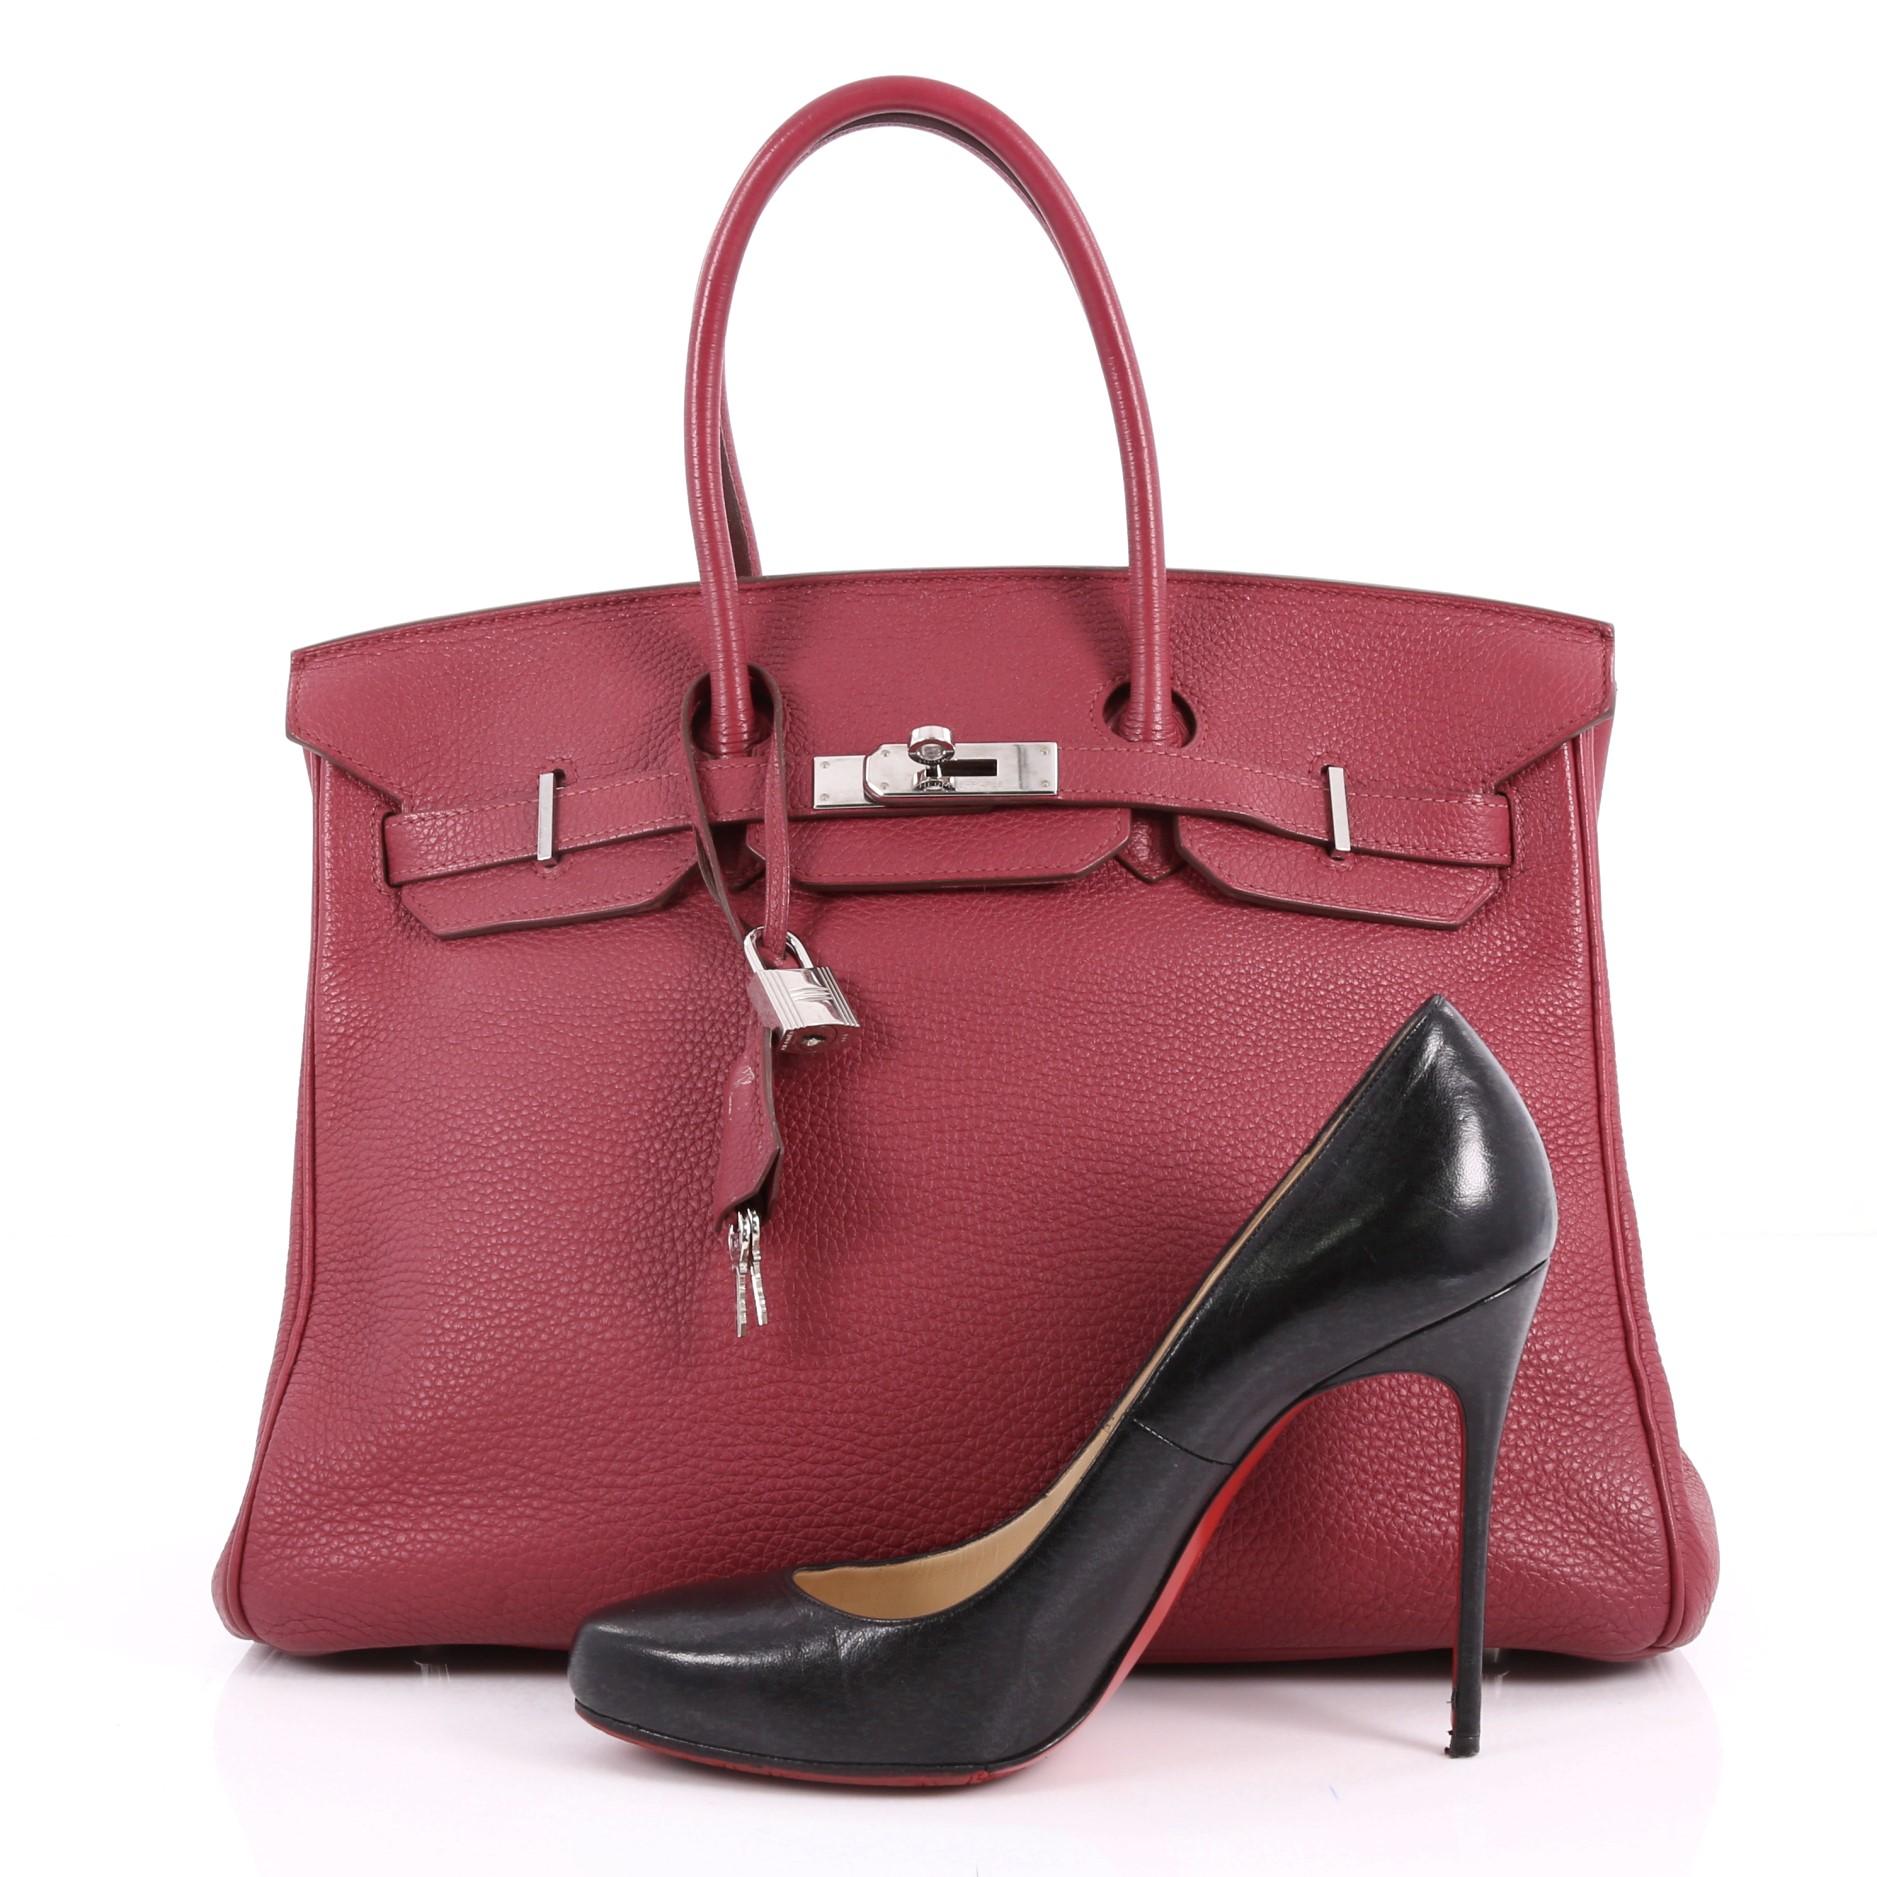 This authentic Hermes Birkin Handbag Rubis Togo with Palladium Hardware 35 stands as one of the most-coveted bags. Constructed from scratch-resistant, iconic rubis togo leather, this stand-out tote features dual-rolled top handles, frontal flap,